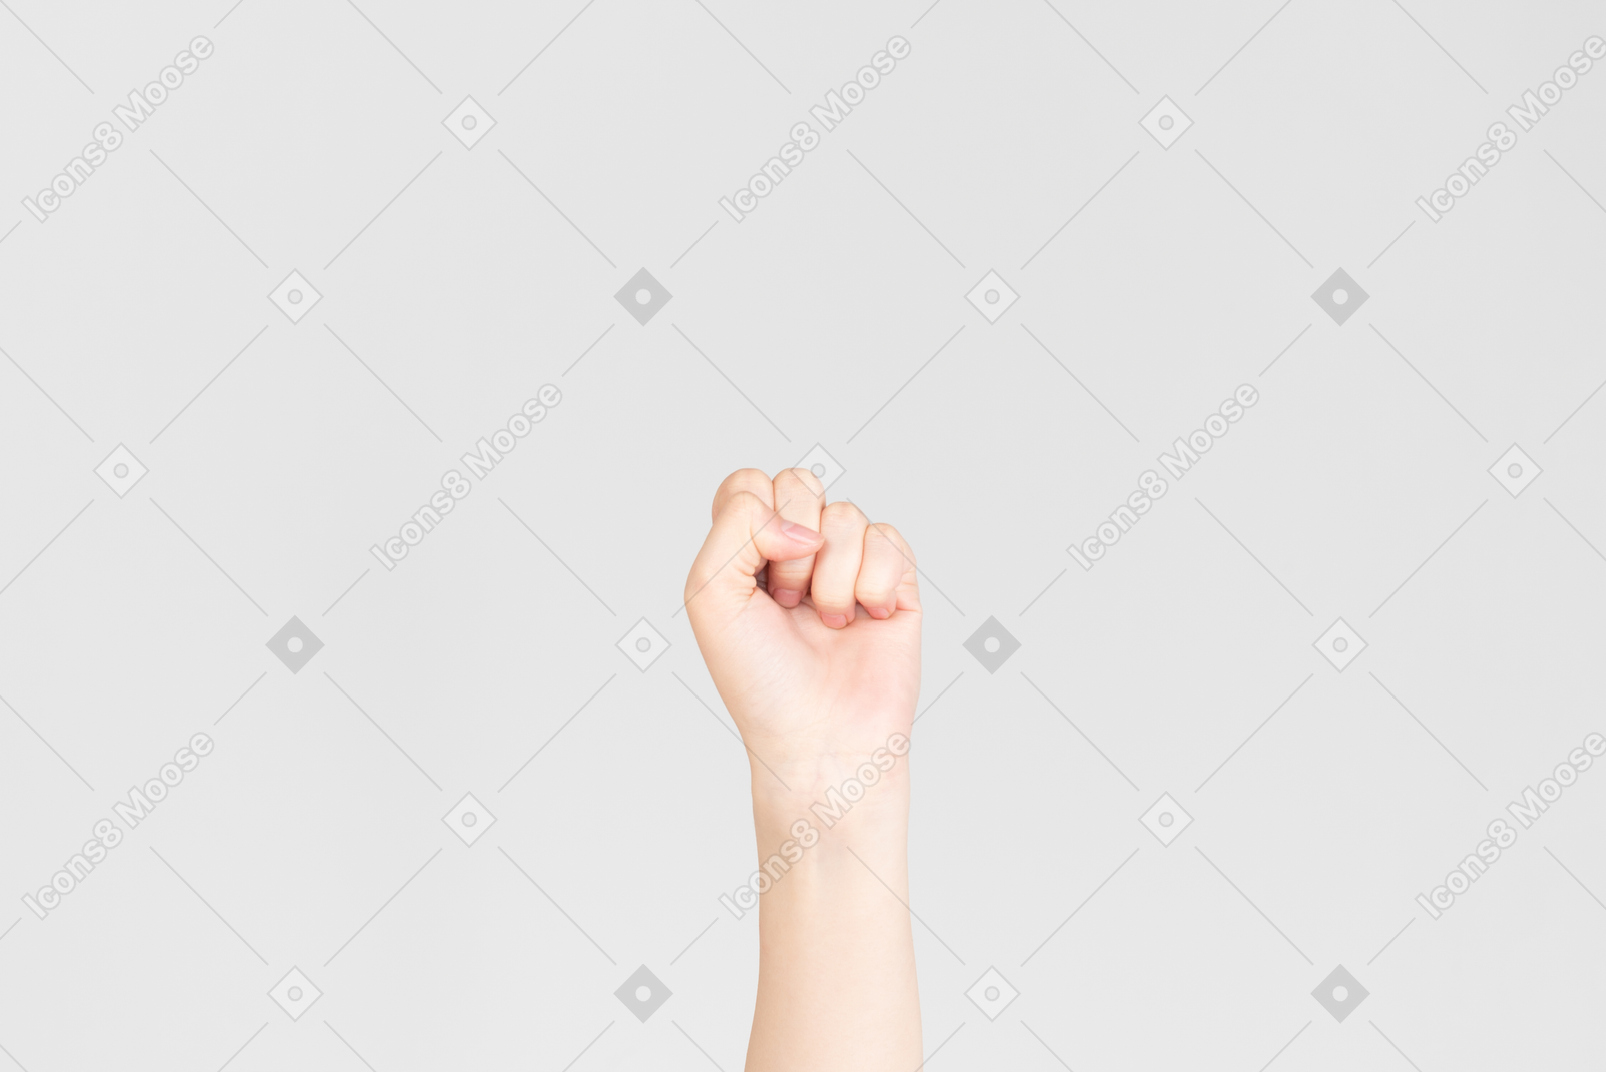 Female hand clenched in fist